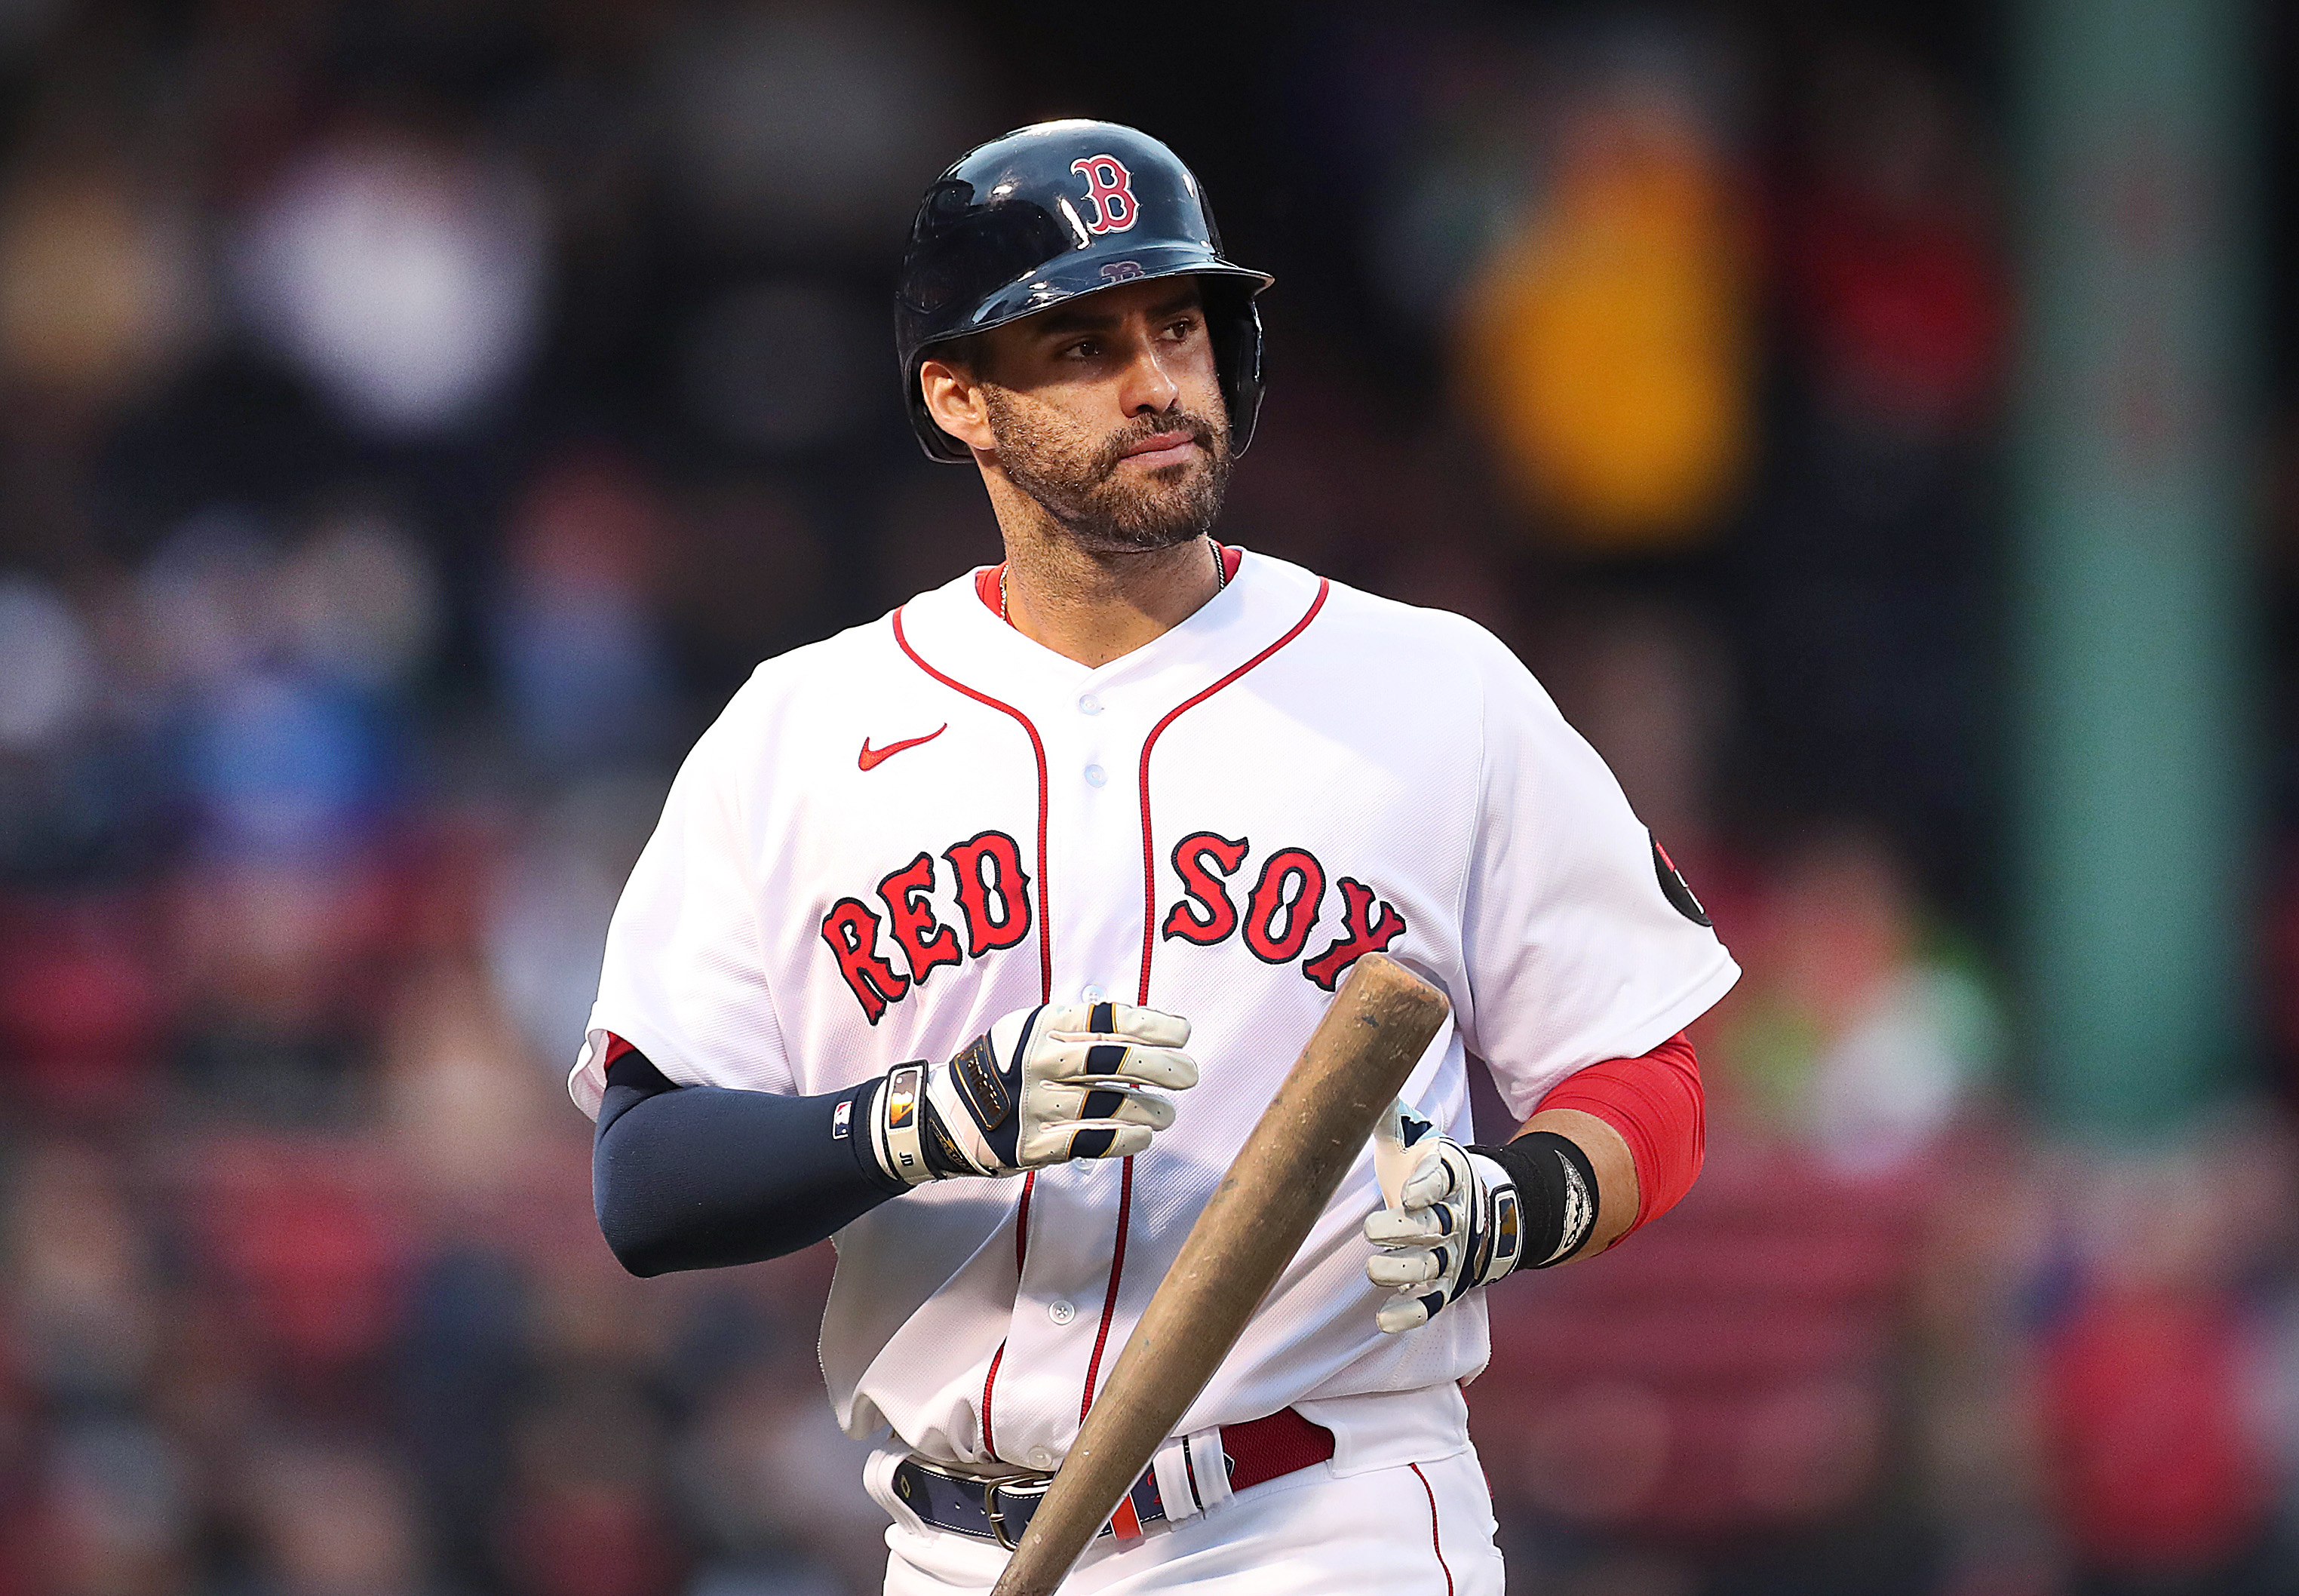 J.D. Martinez slugs his way to National League Player of the Week